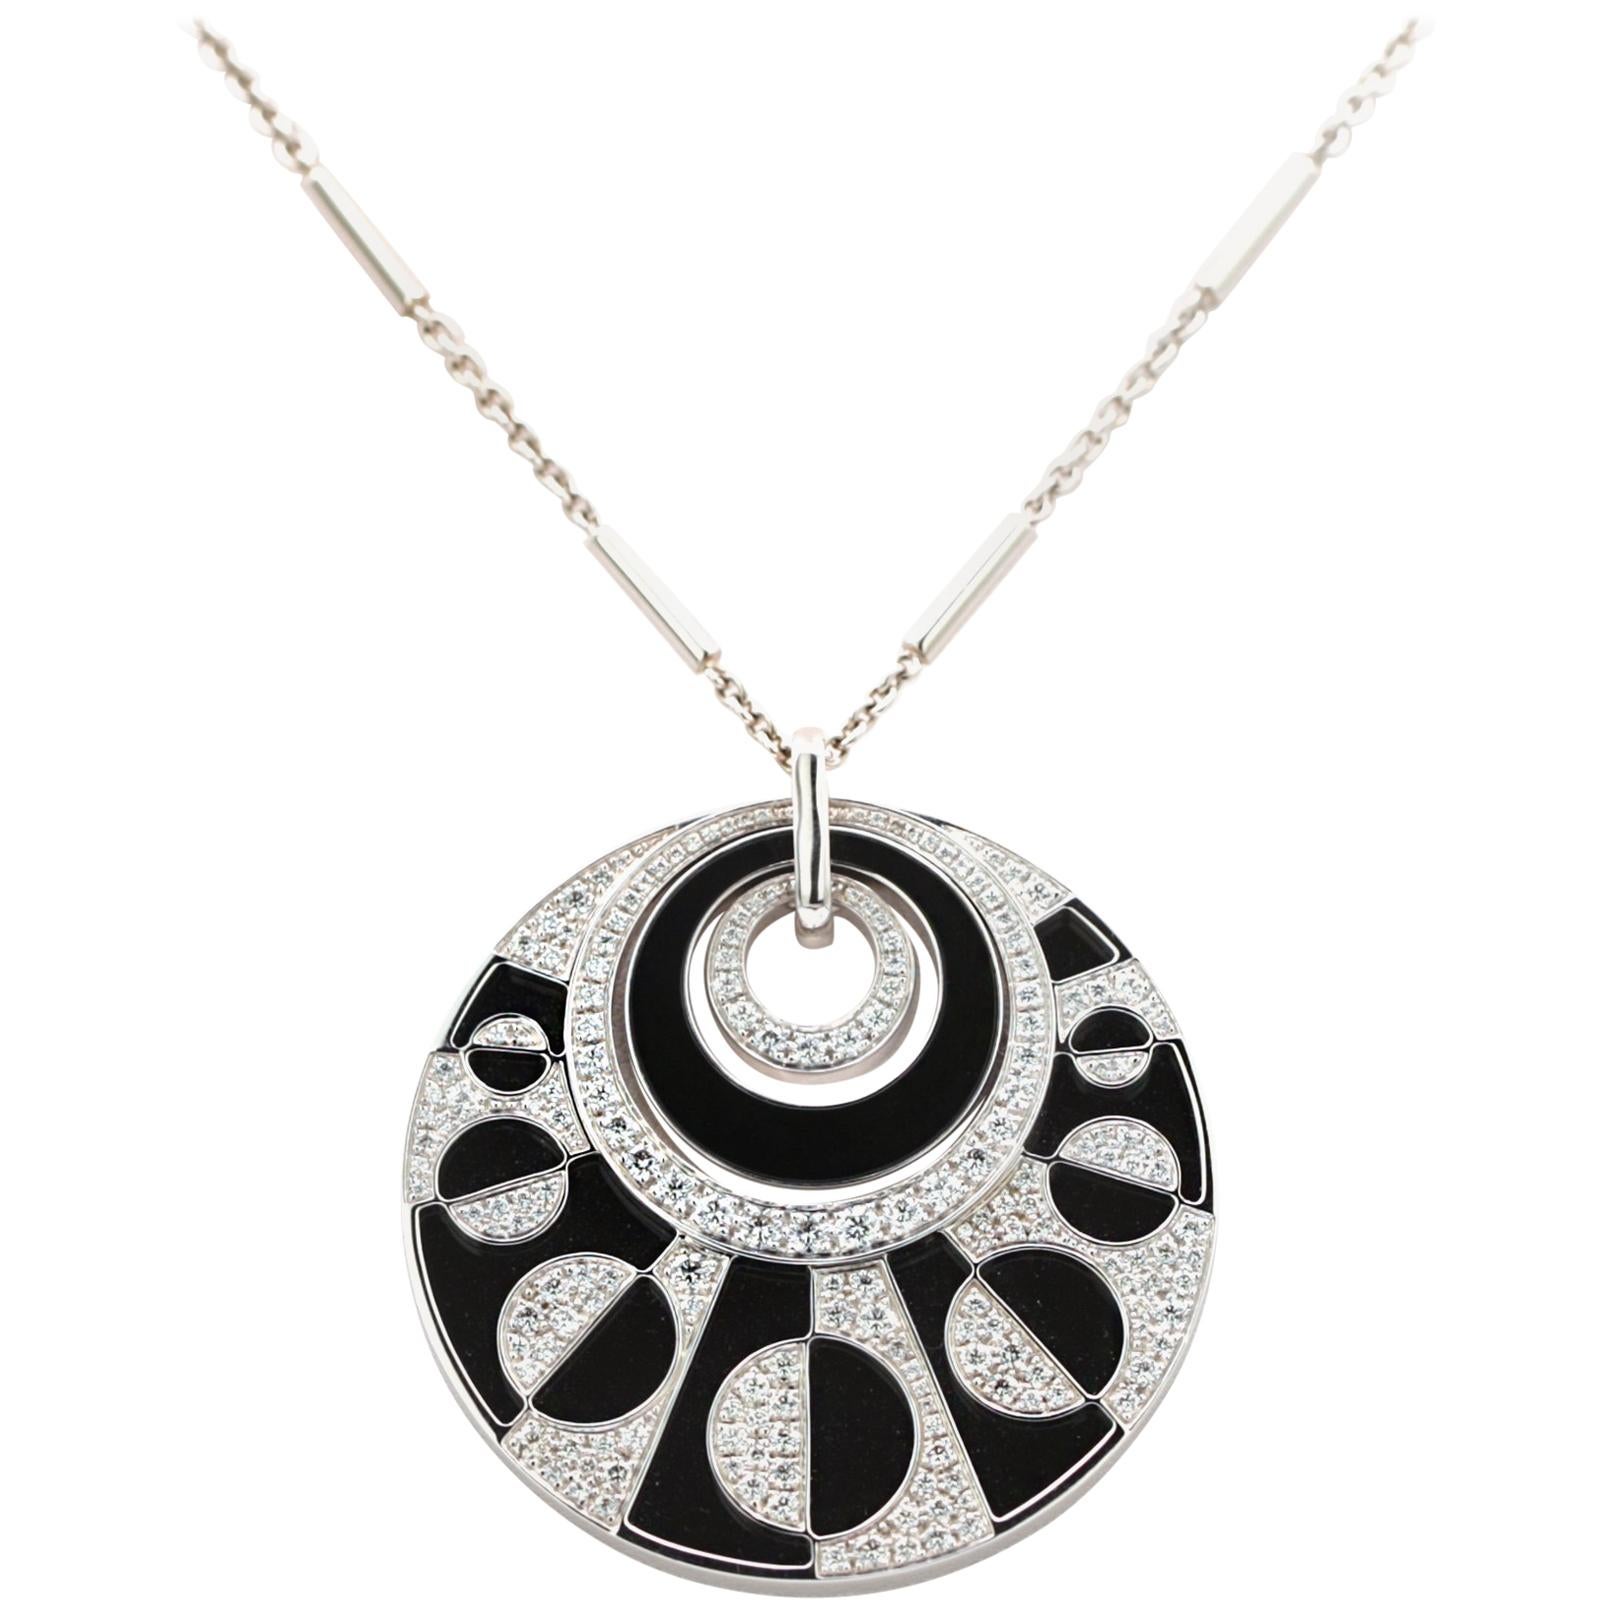 Bvlgari Necklace Large - 7 For Sale on 1stDibs